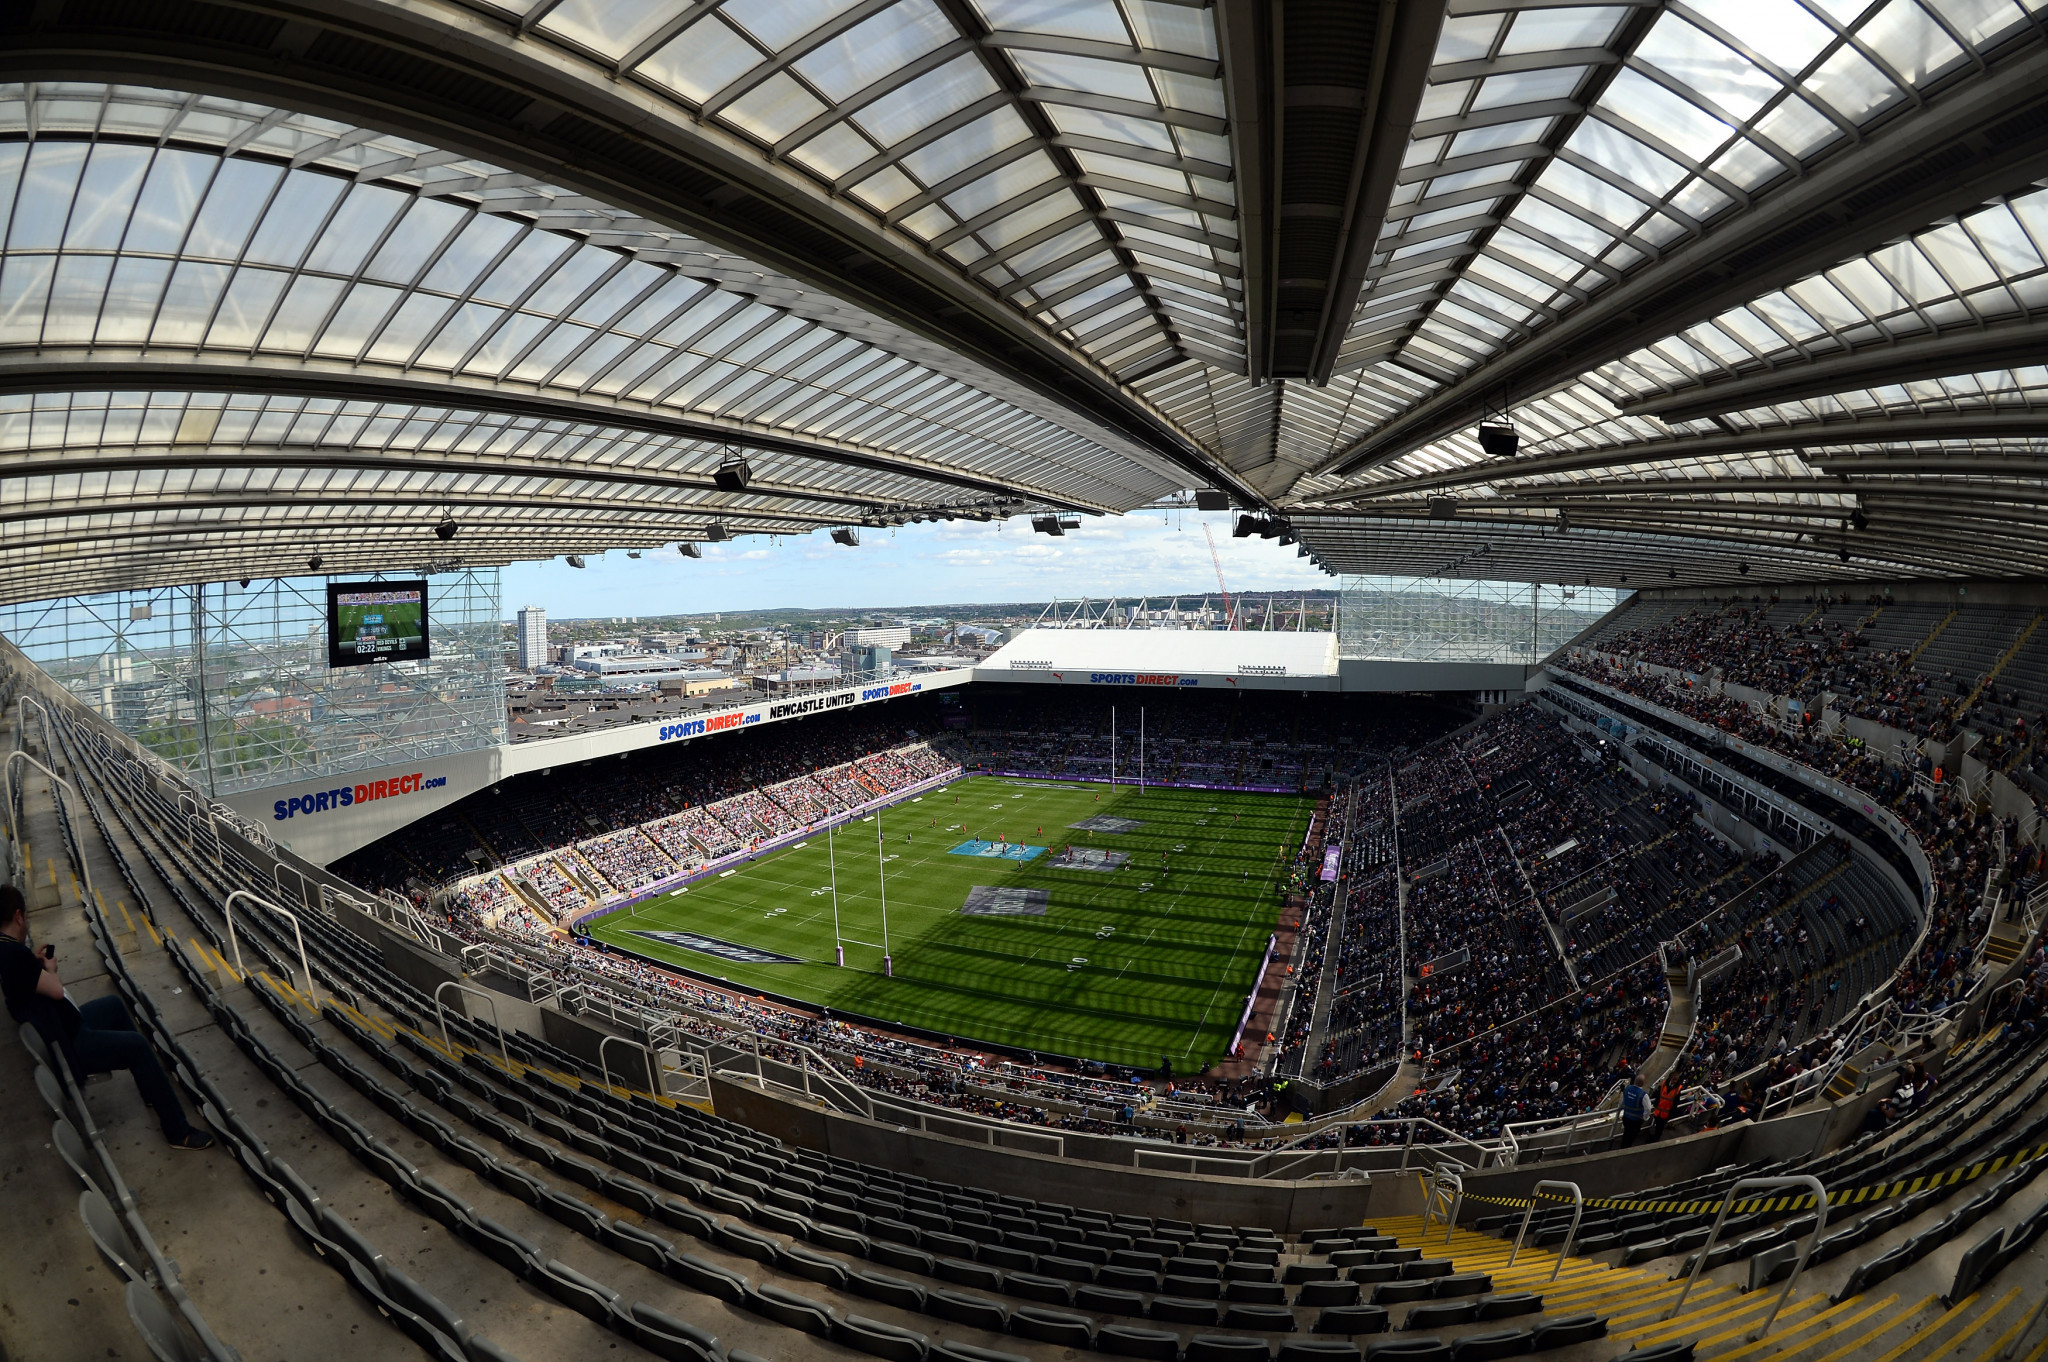 St James' Park will host the first game of the Rugby League World Cup on October 23 ©Getty Images